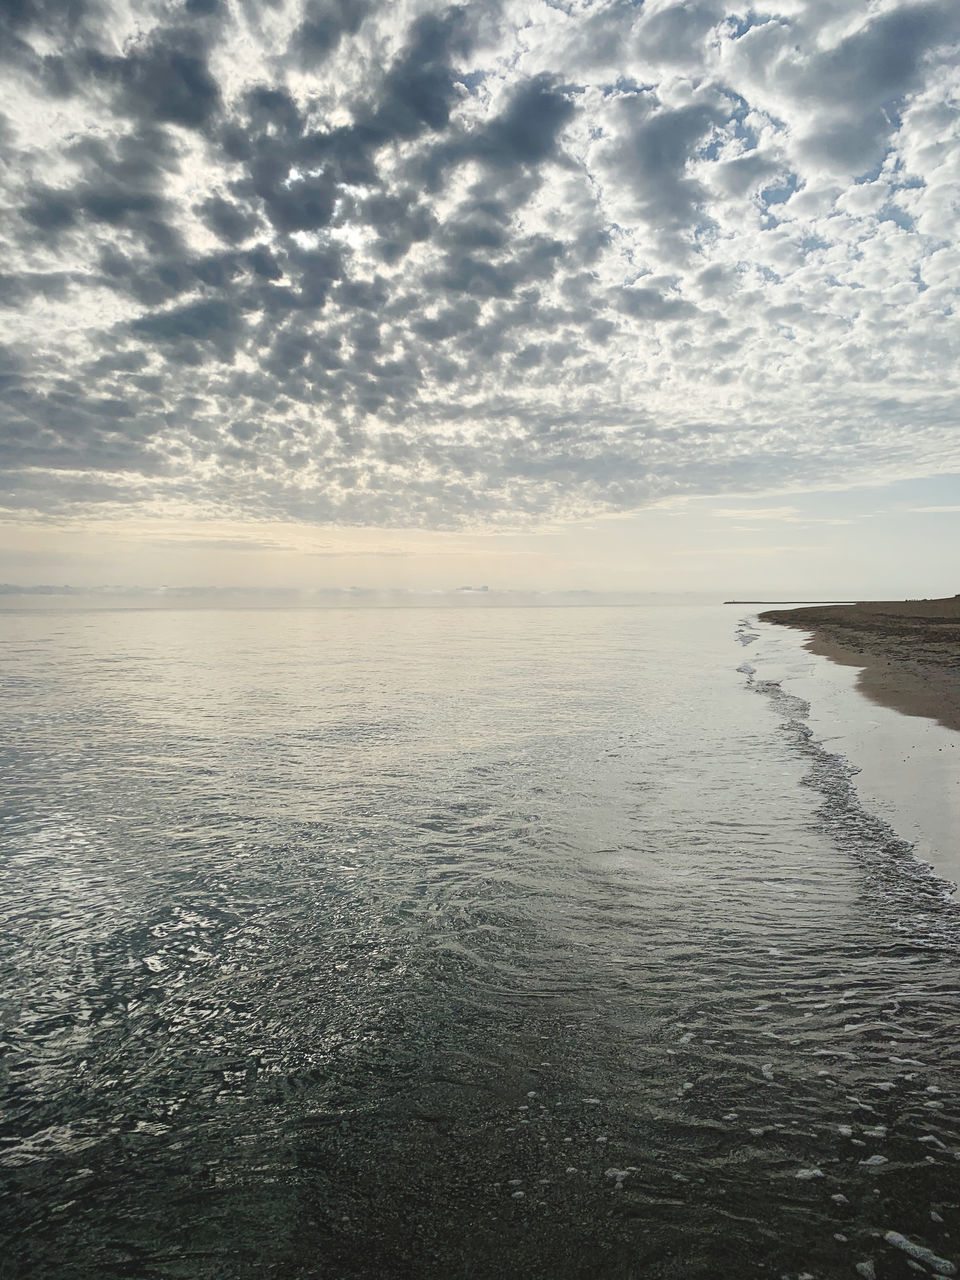 sky, water, horizon, cloud, sea, scenics - nature, beauty in nature, tranquility, ocean, nature, reflection, sunlight, tranquil scene, coast, shore, land, beach, horizon over water, no people, wave, body of water, environment, morning, outdoors, day, idyllic, dawn, seascape, landscape, non-urban scene